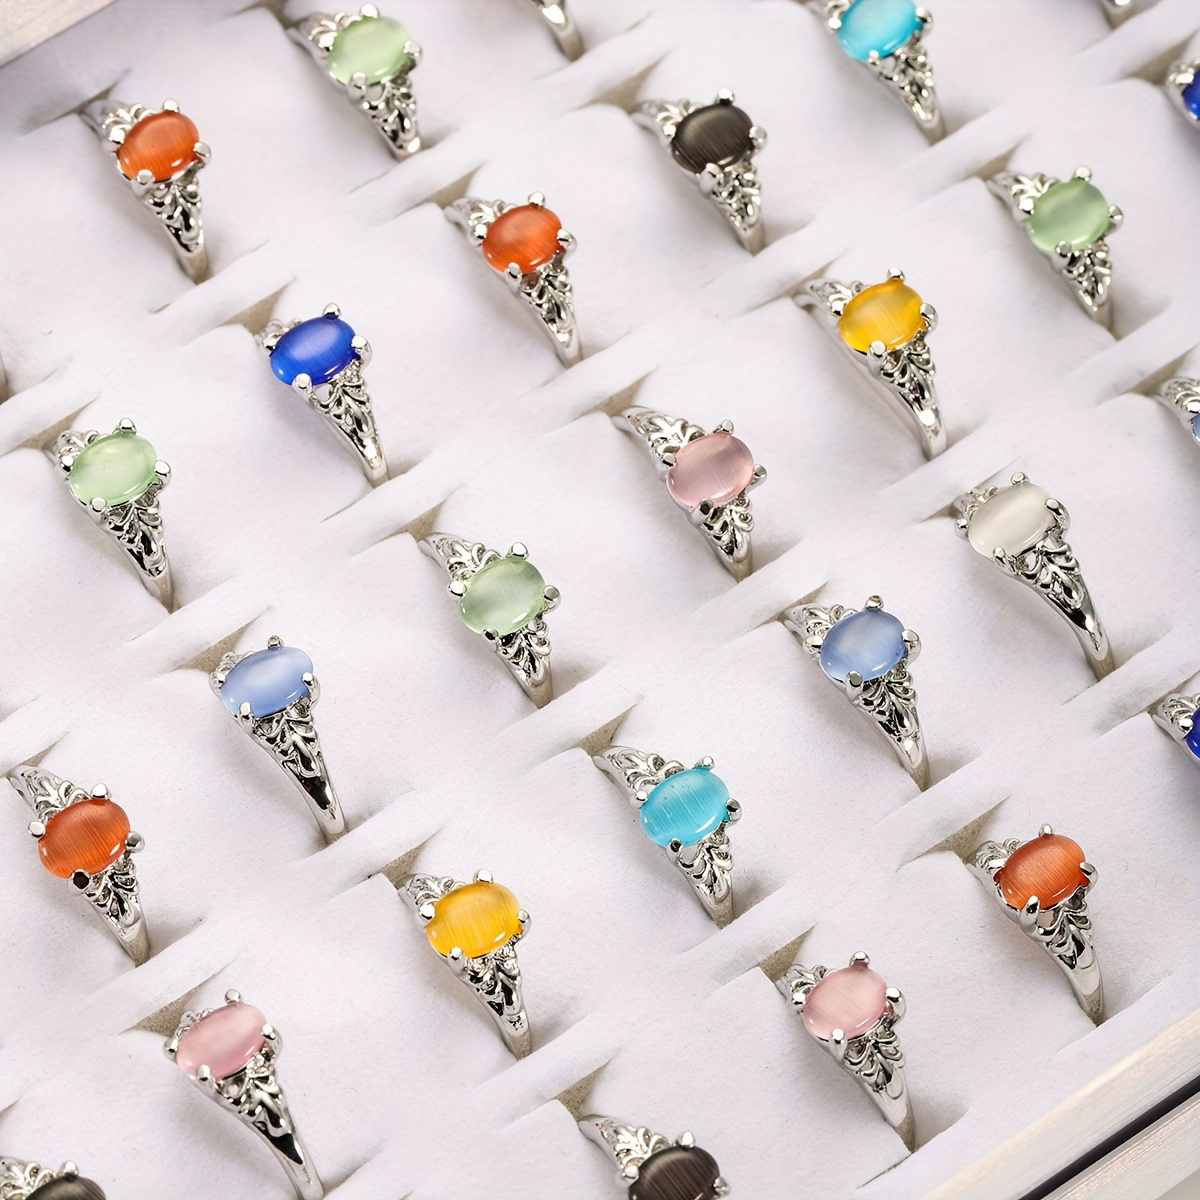 

Us Wholesale Lots 50pcs Beautiful Synthetic Cat's Eye Stone Alloy Finger Rings For Women Colorful Girl Party Gifts ( Size 16-19mm Random Box Is Not Include )